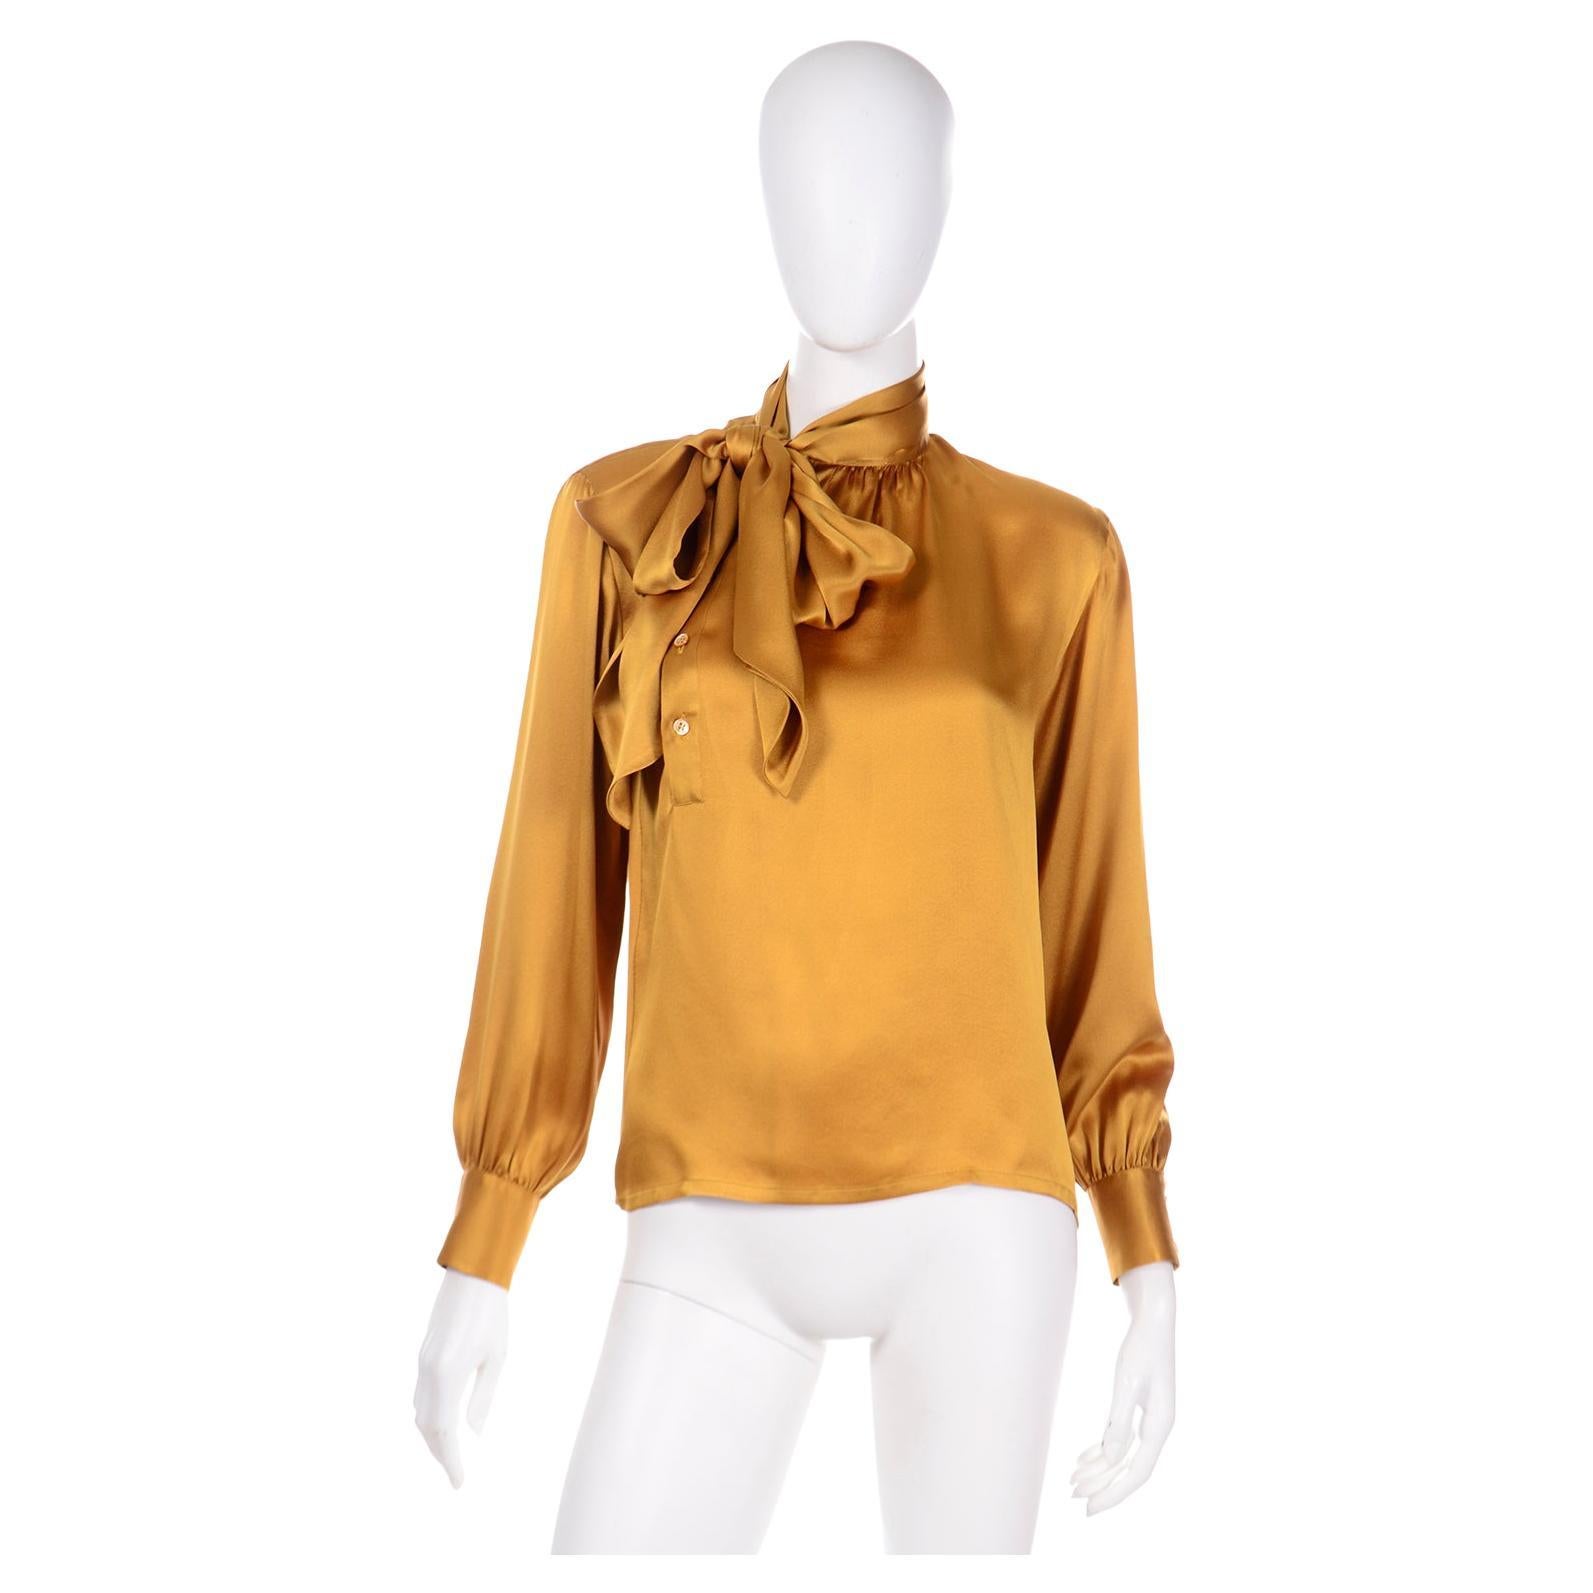 This is a luxurious Yves Saint Laurent gold silk charmeuse vintage blouse from the late 1980's with an attached sash that can be tied into a knot or a bow and a separate sash belt that can be worn around the waist or as a head scarf.

In Yves Saint